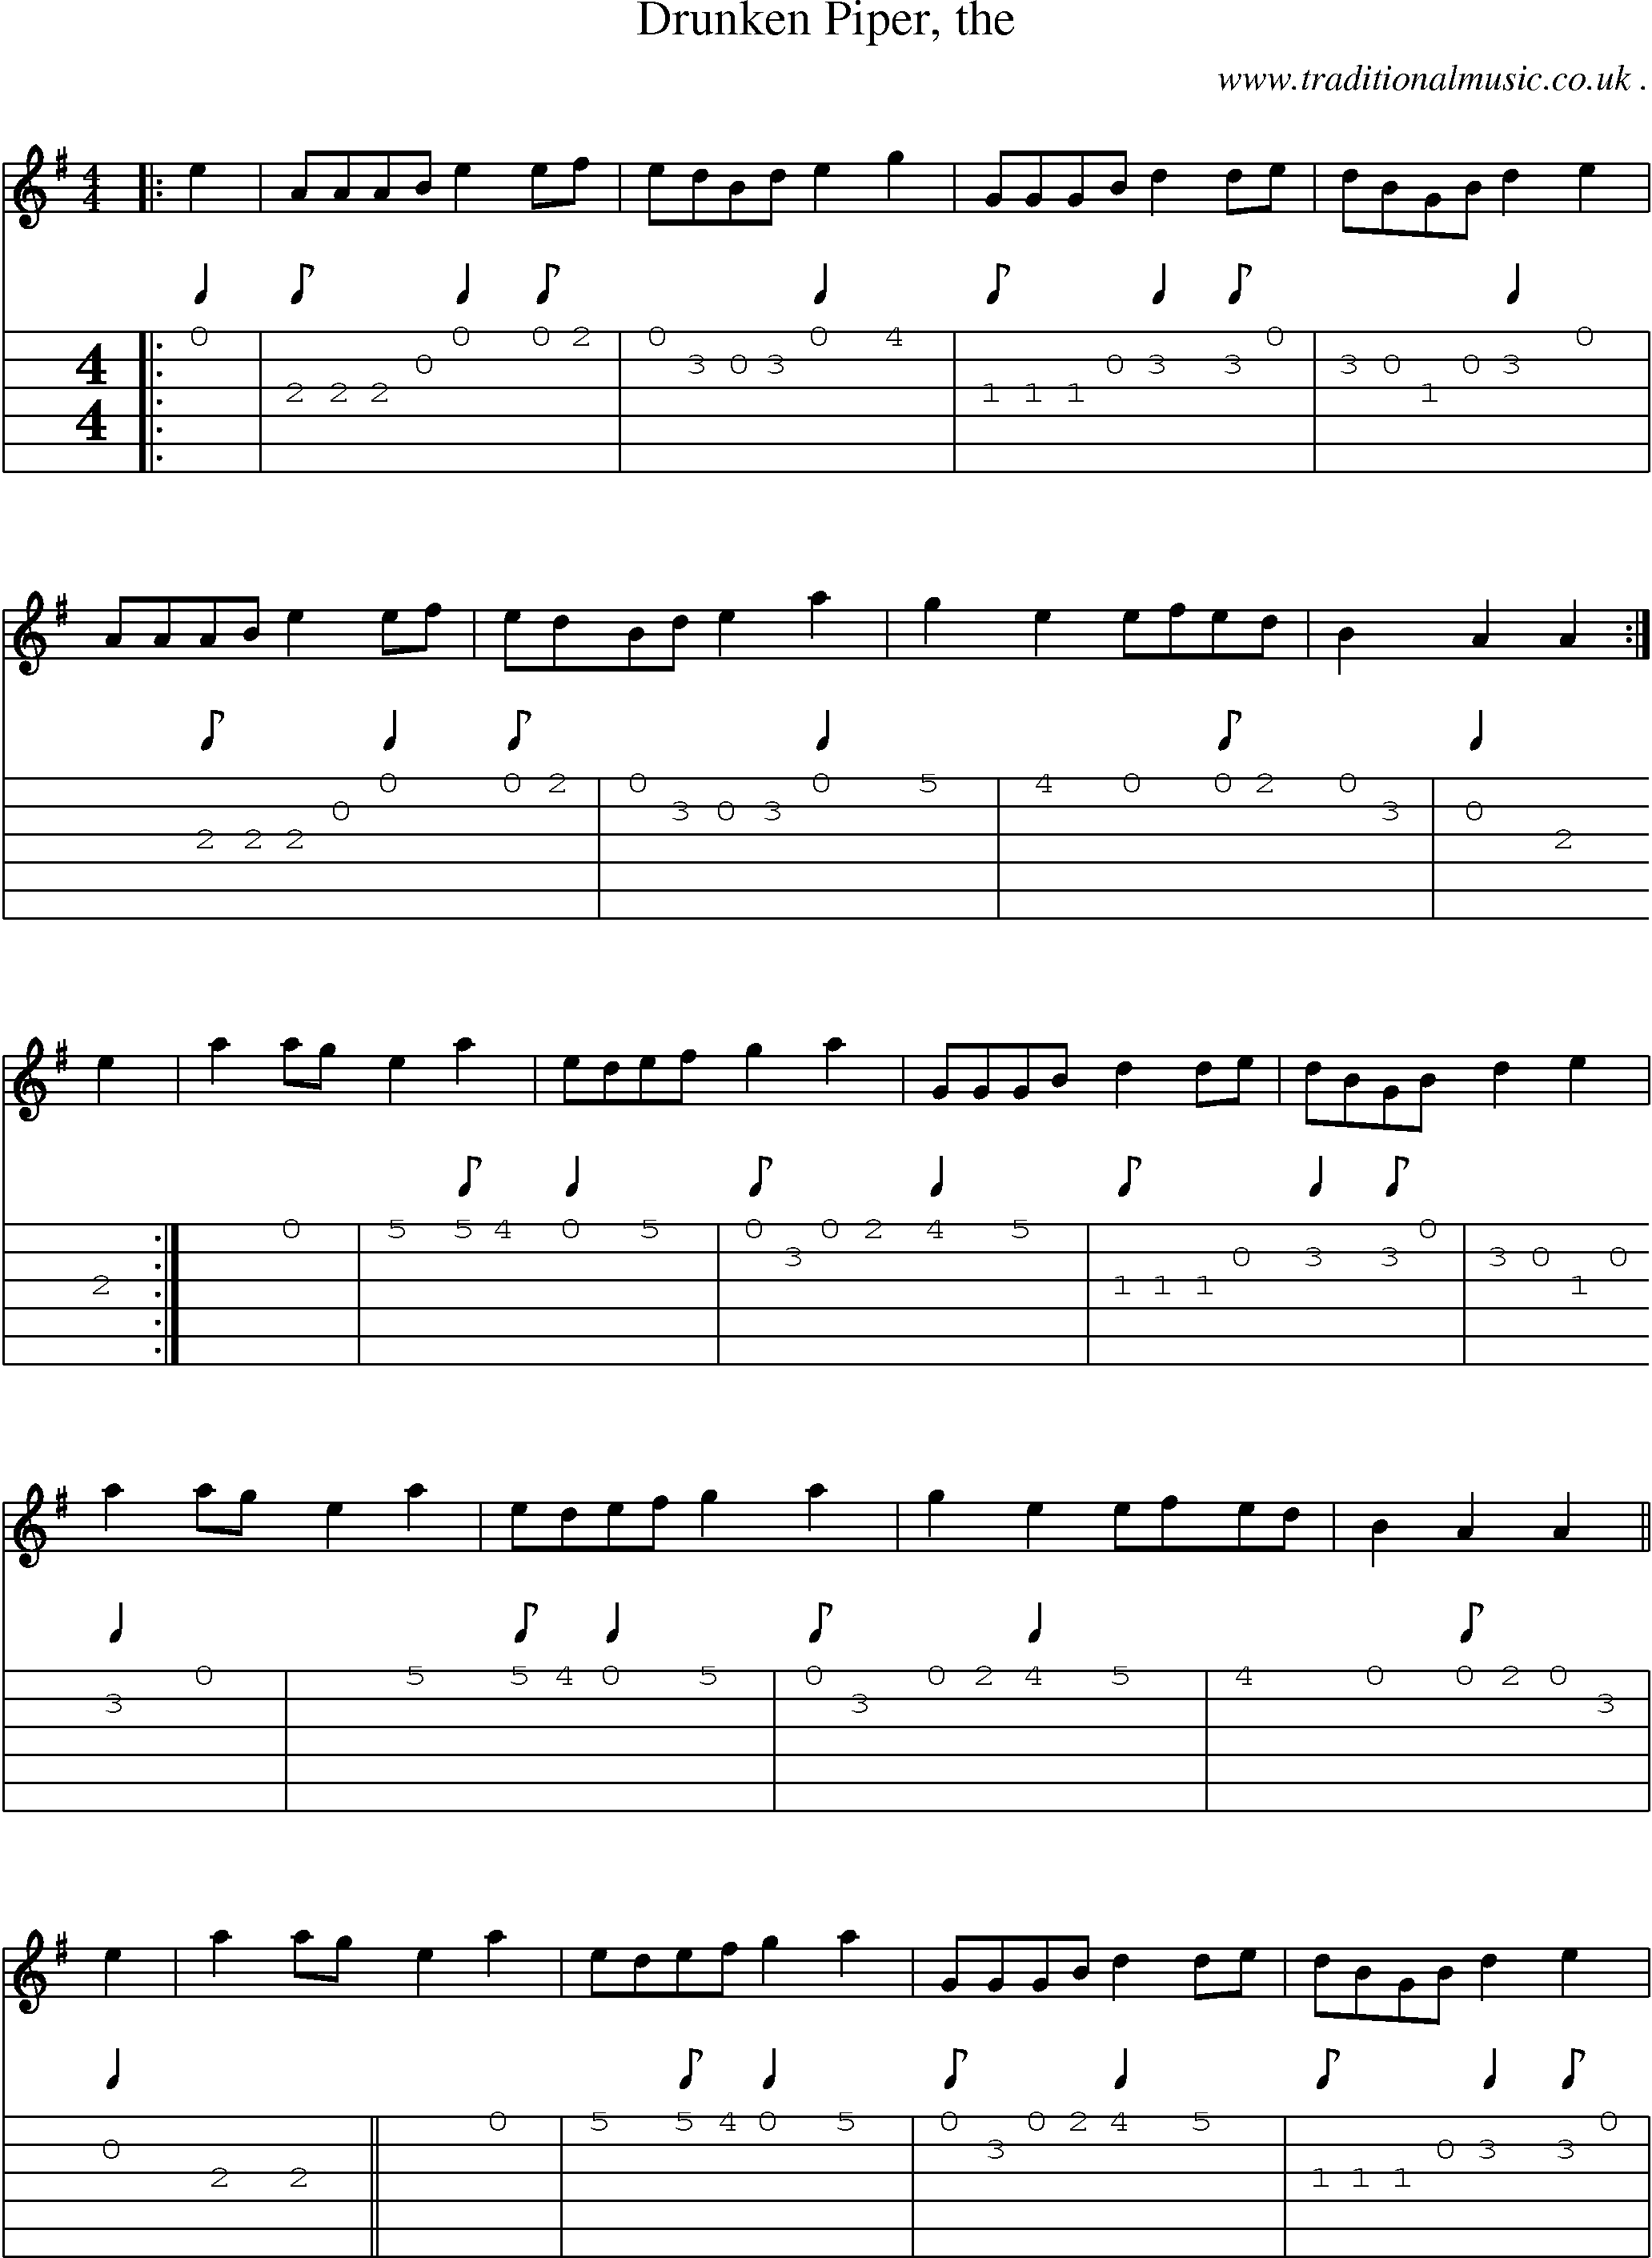 Sheet-music  score, Chords and Guitar Tabs for Drunken Piper The